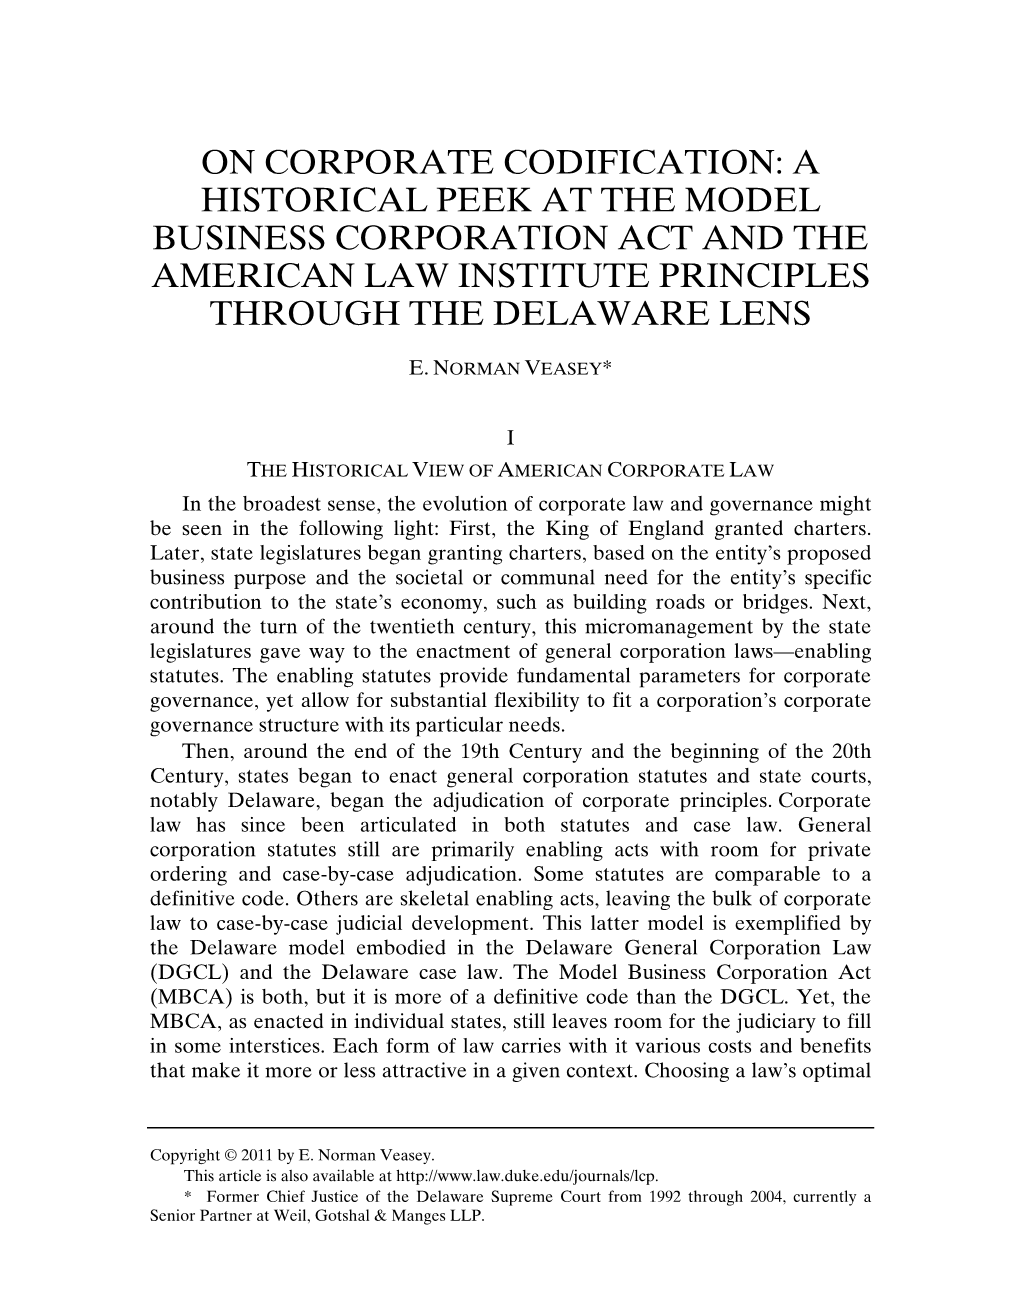 A Historical Peek at the Model Business Corporation Act and the American Law Institute Principles Through the Delaware Lens